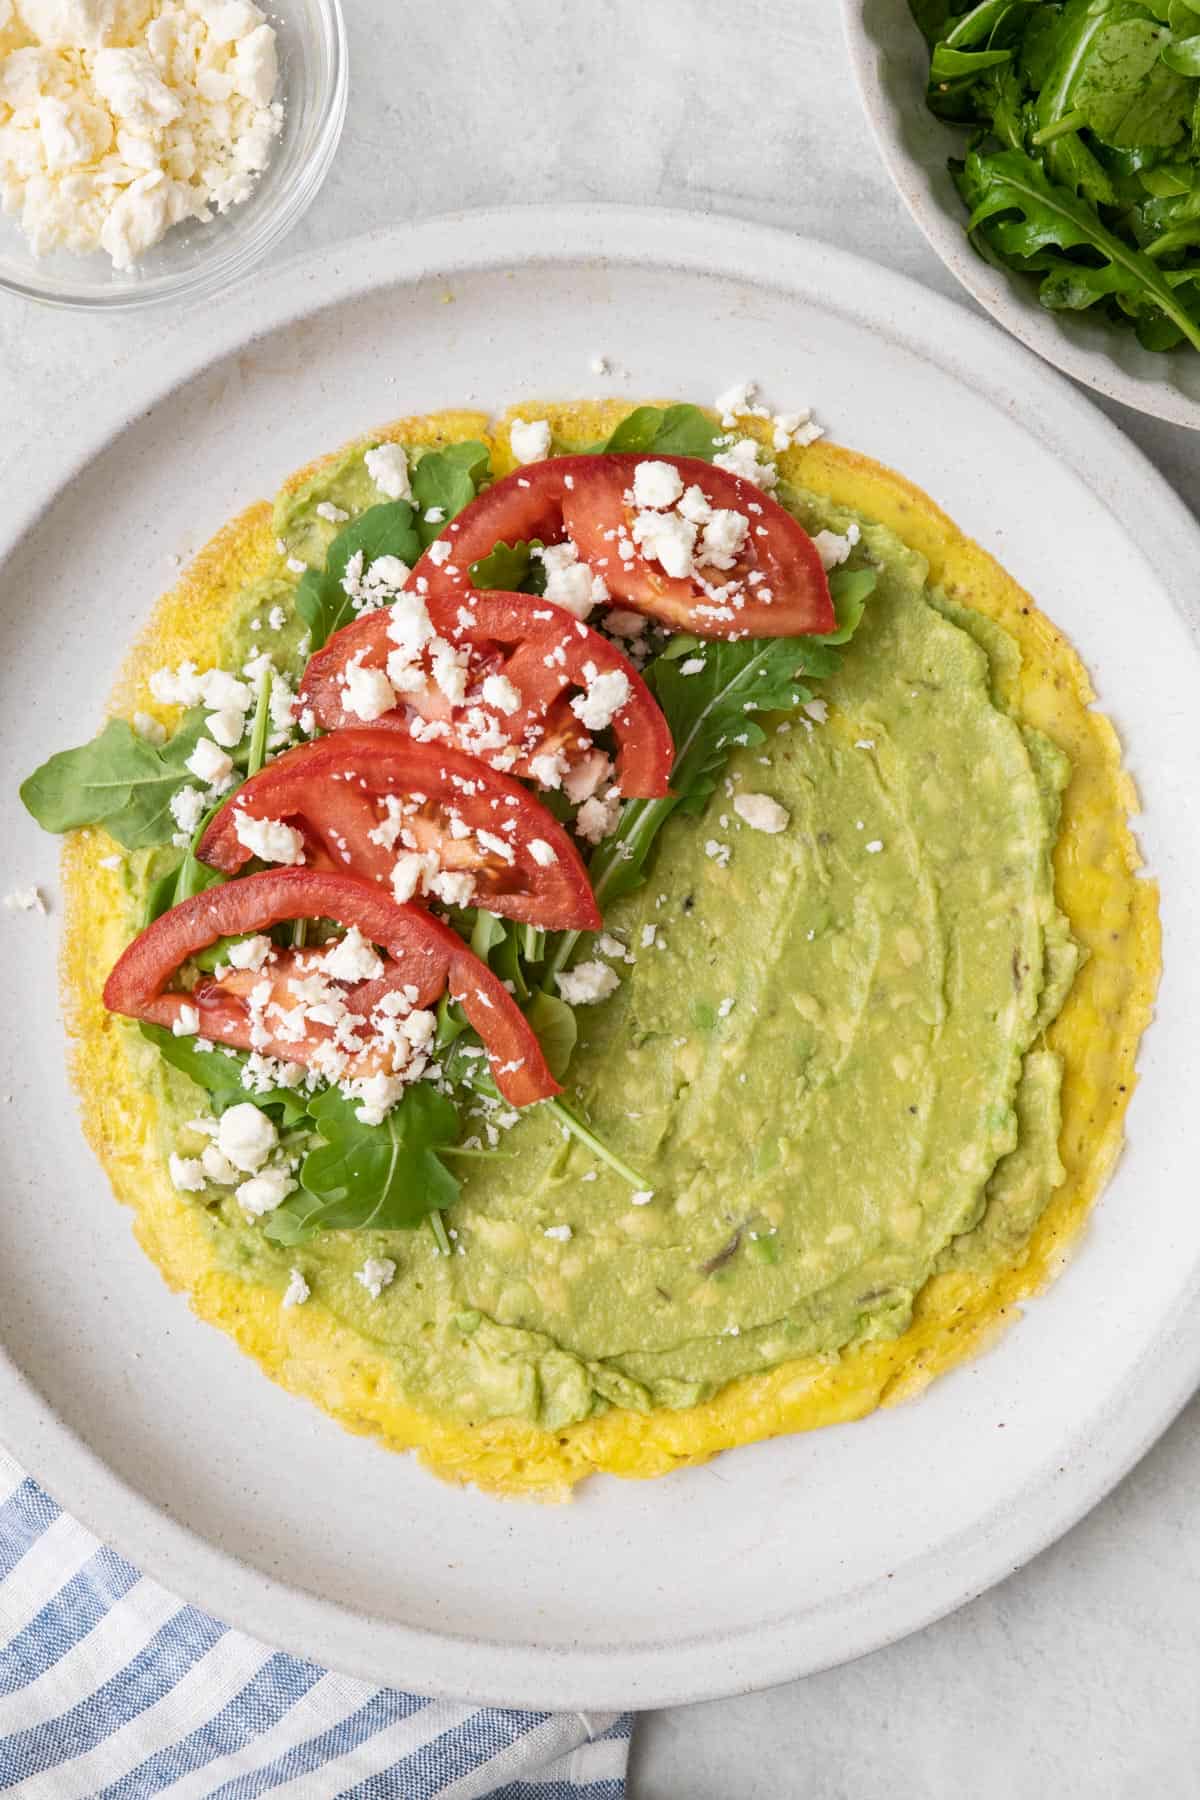 Egg wrap shell on plate with avocado mash spread on and then half topped with arugula, sliced tomato halves, and feta cheese.